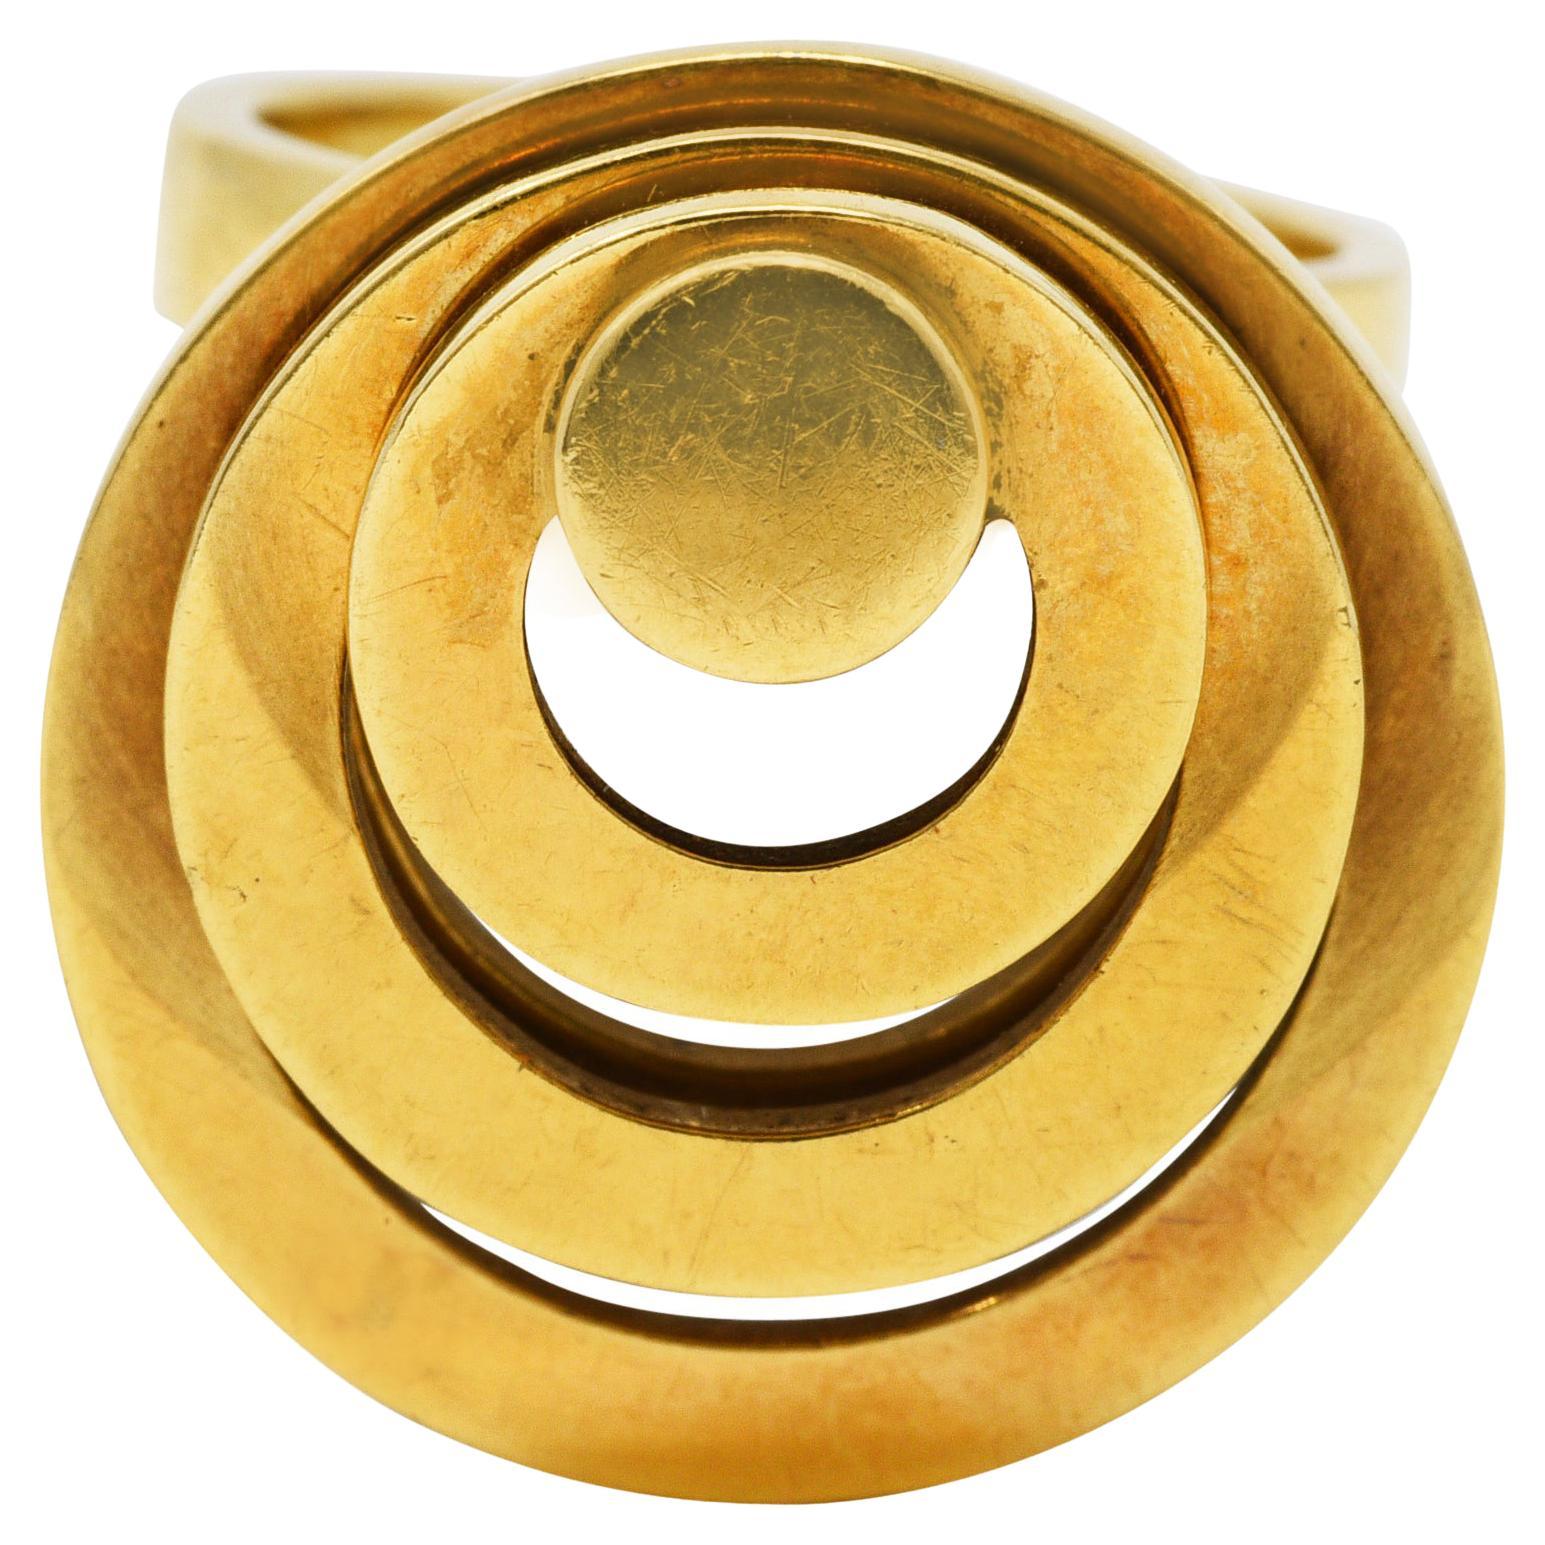 Ring designed as geometric stacked motion ring 

Featuring five tiered circles of varying sizes that spin around a central point

Completed by simple band shank

With French assay marks for 18 karat gold

With maker's mark

Circa: 1960's 

Ring